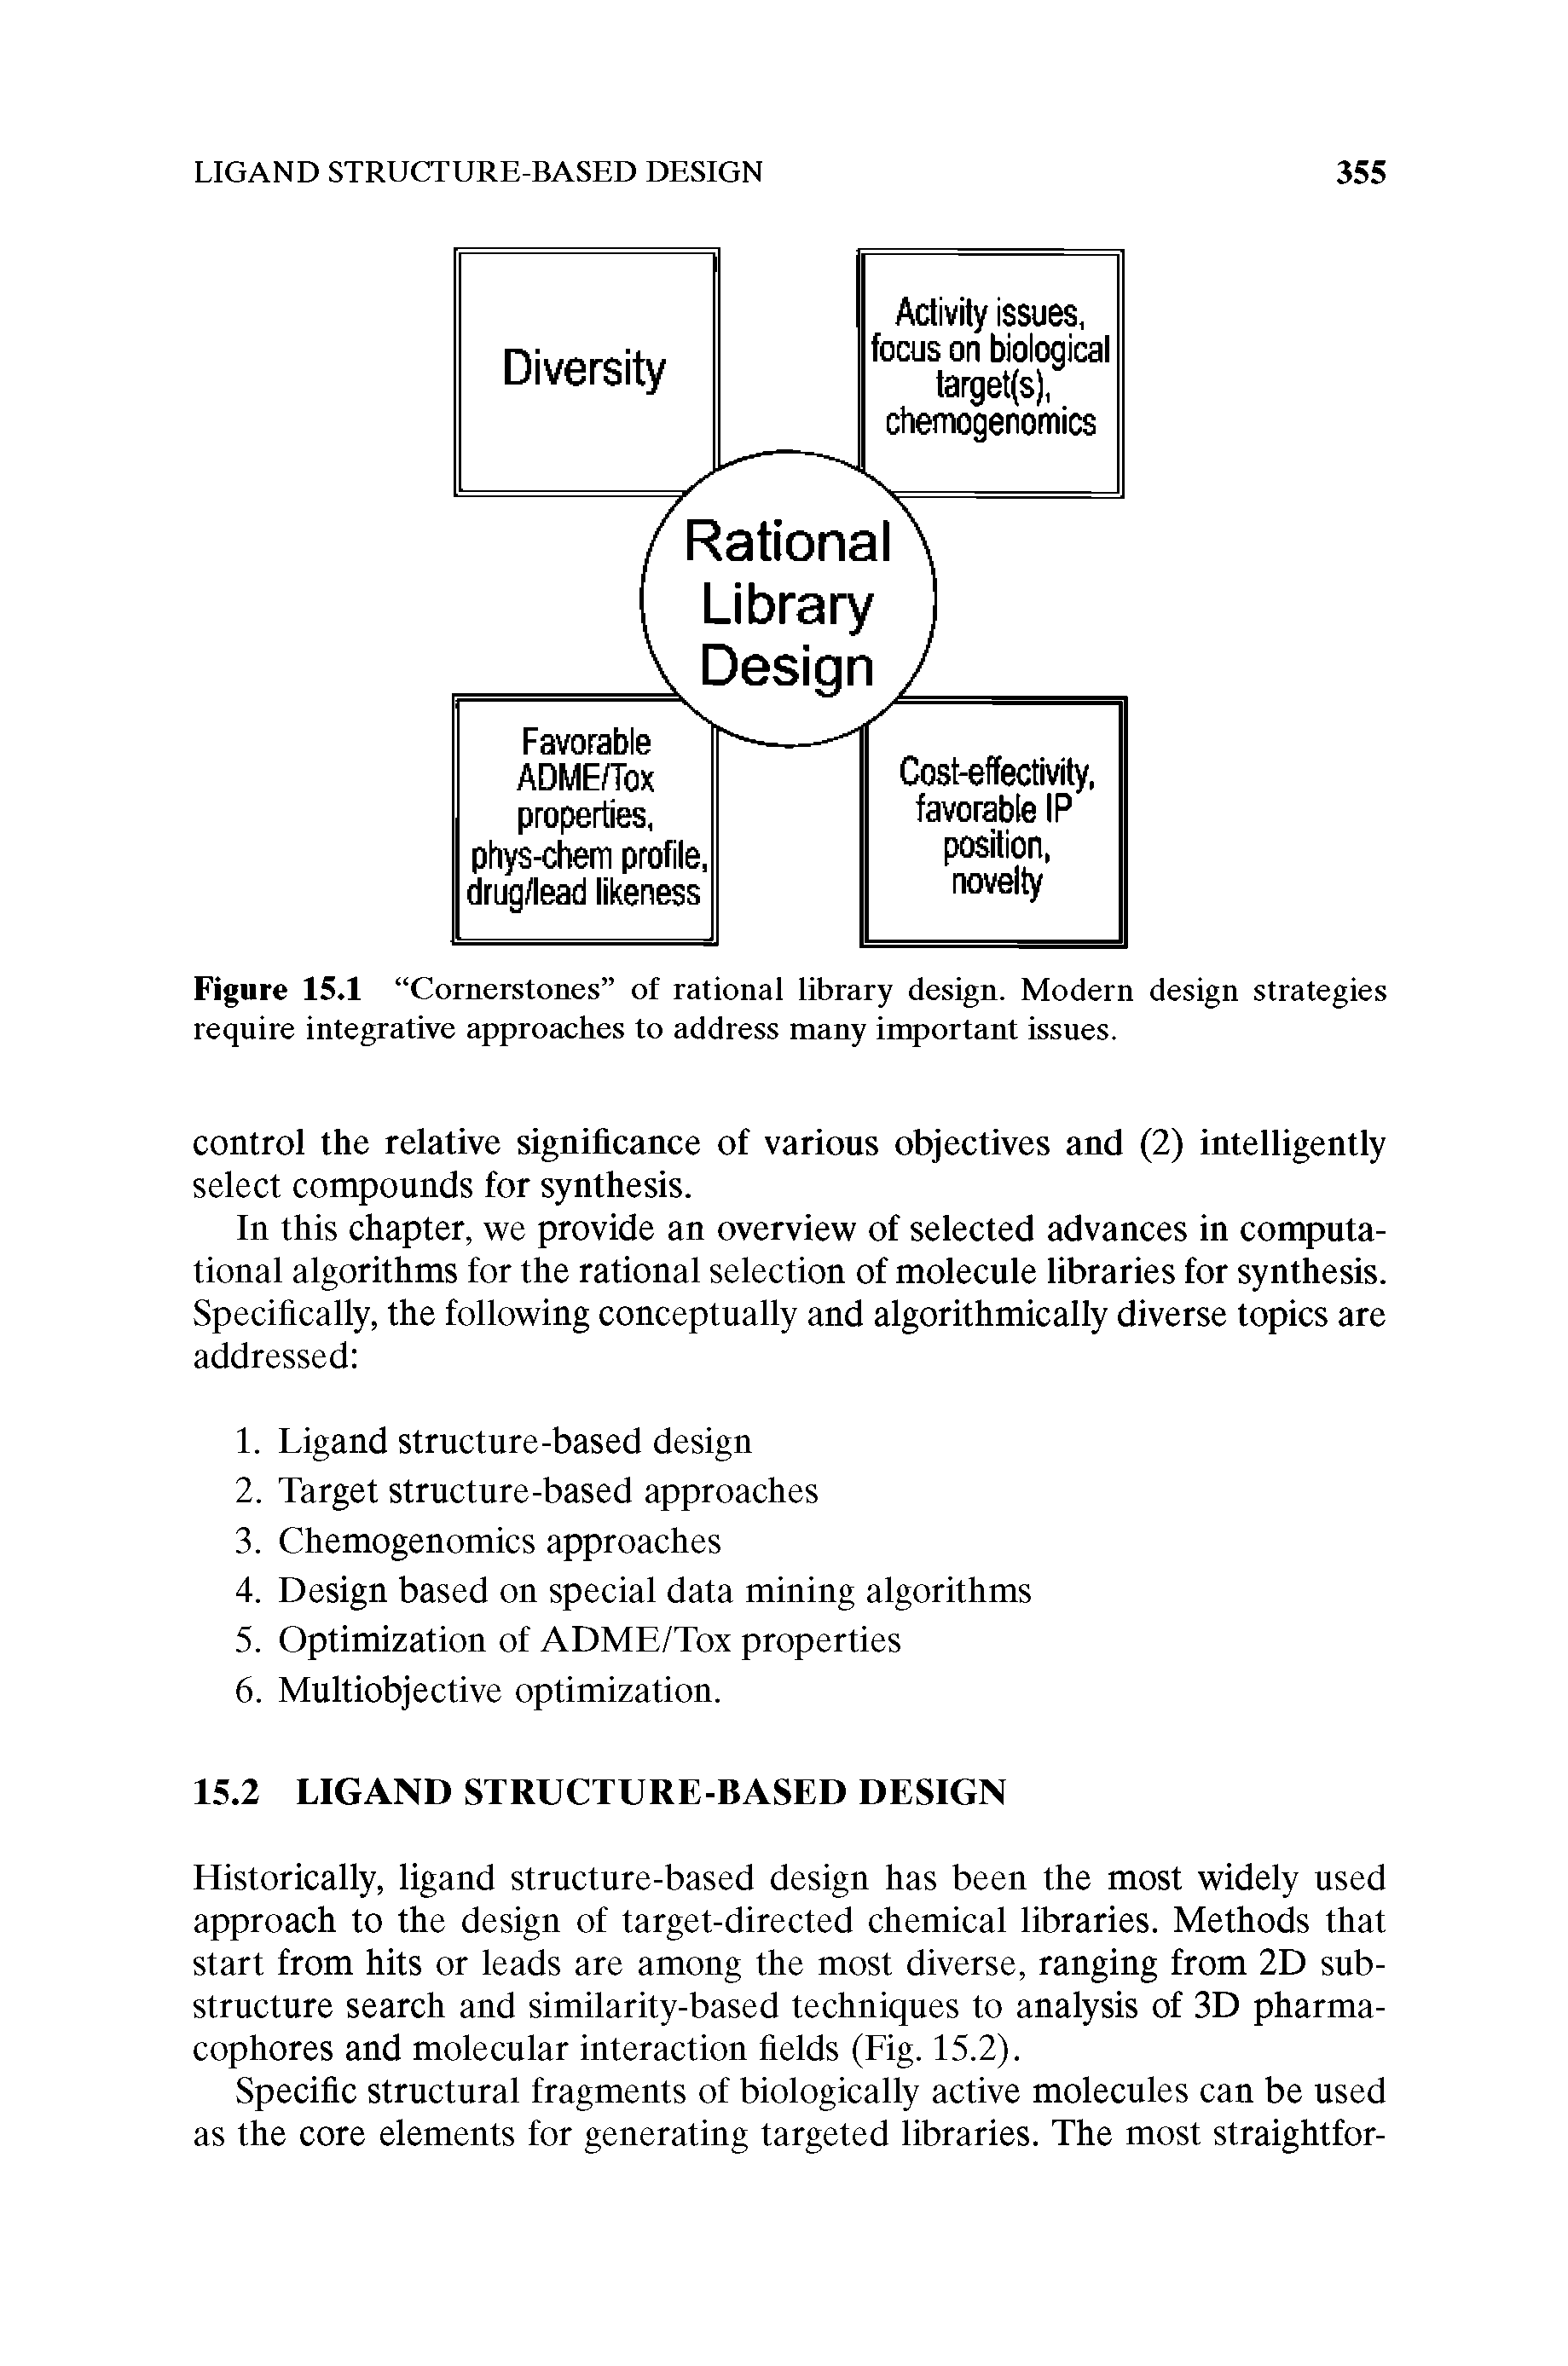 Figure 15.1 Cornerstones of rational library design. Modern design strategies require integrative approaches to address many important issues.